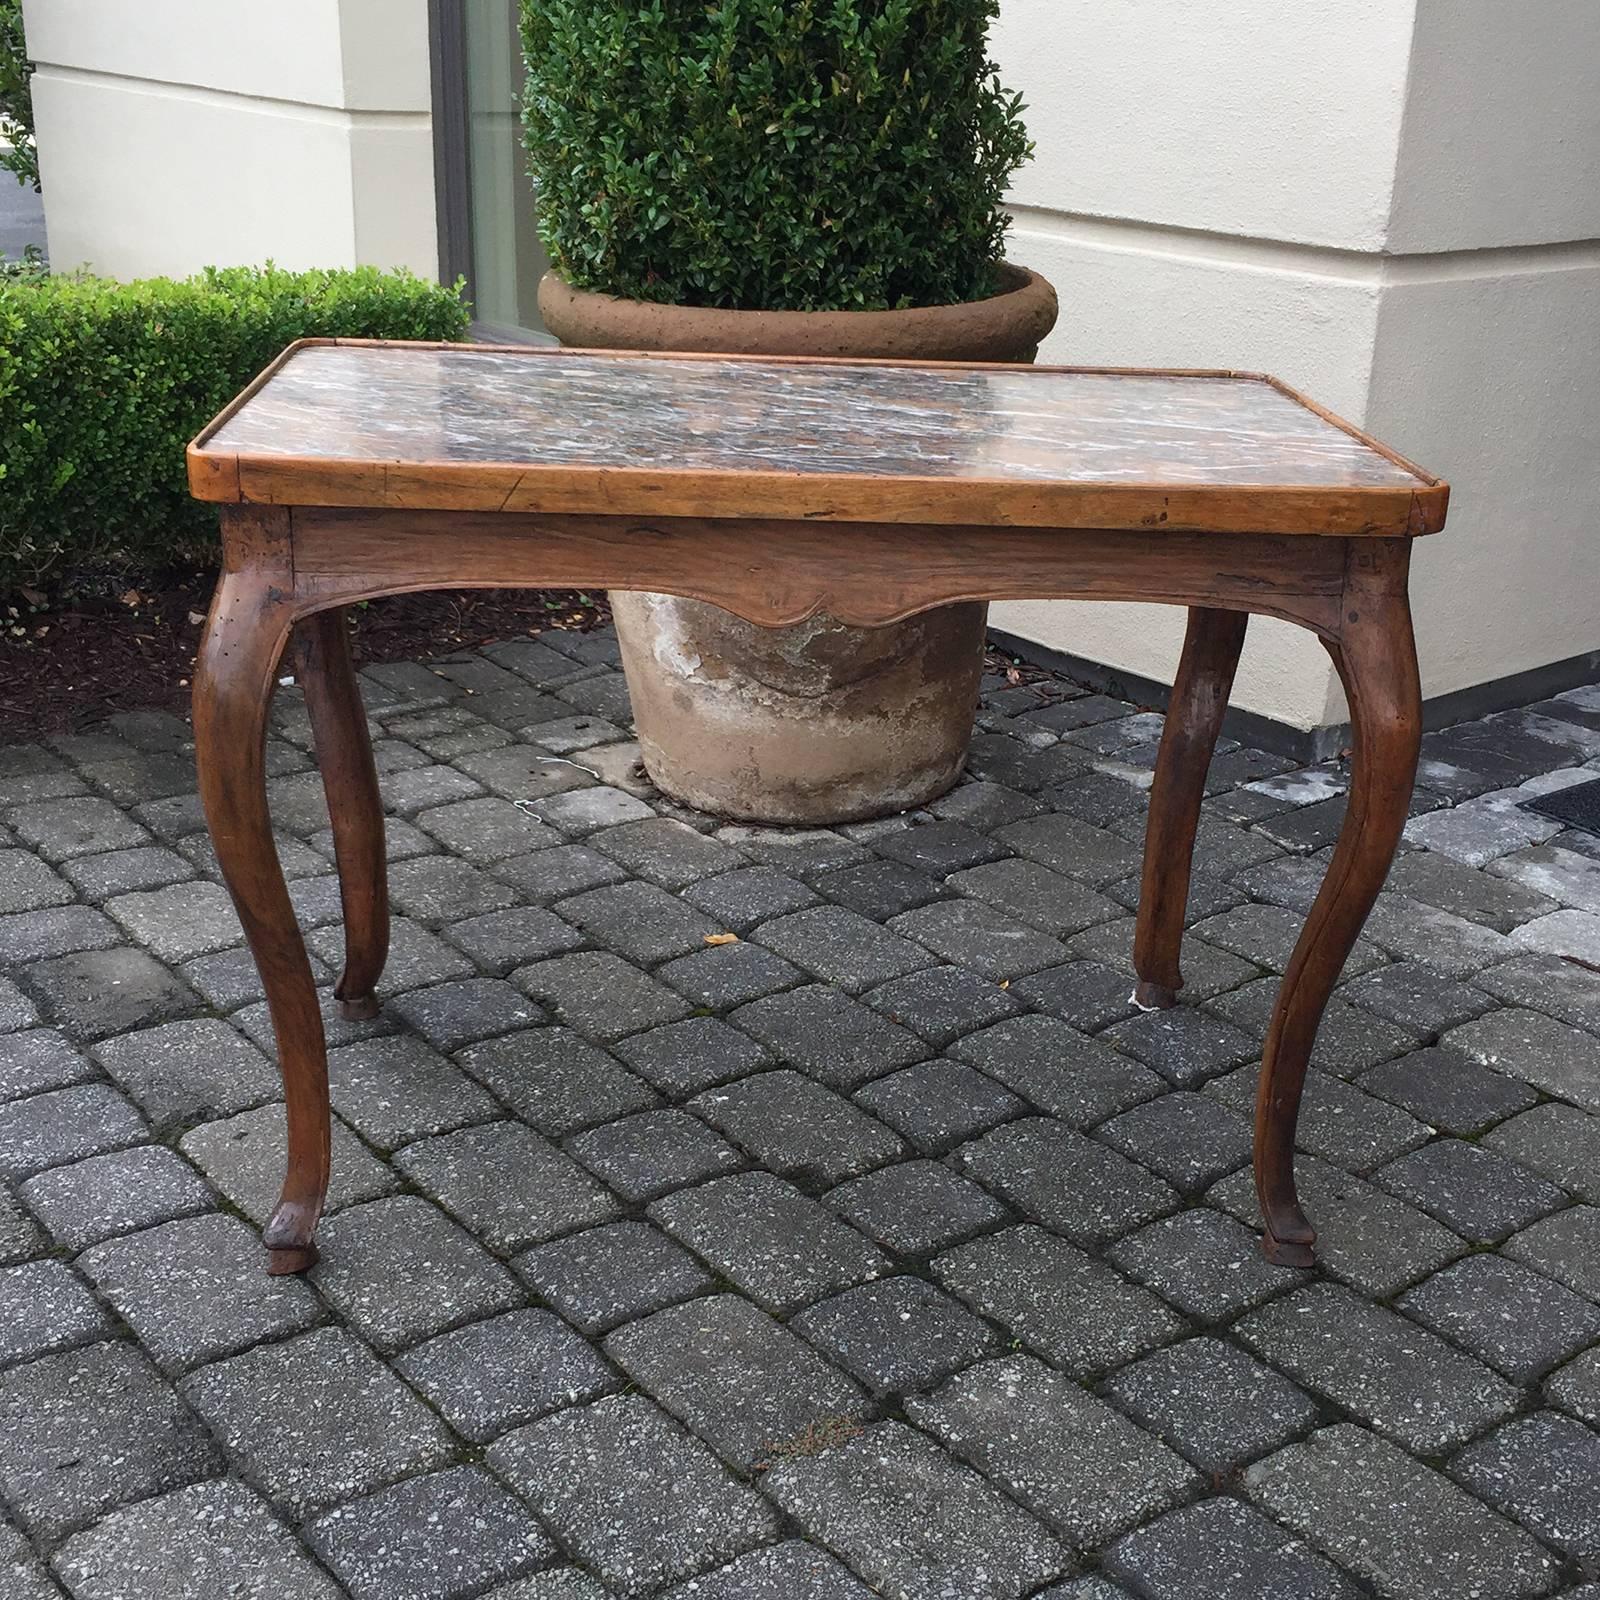 18th-19th century French Louis XV Provincial style fruitwood table.